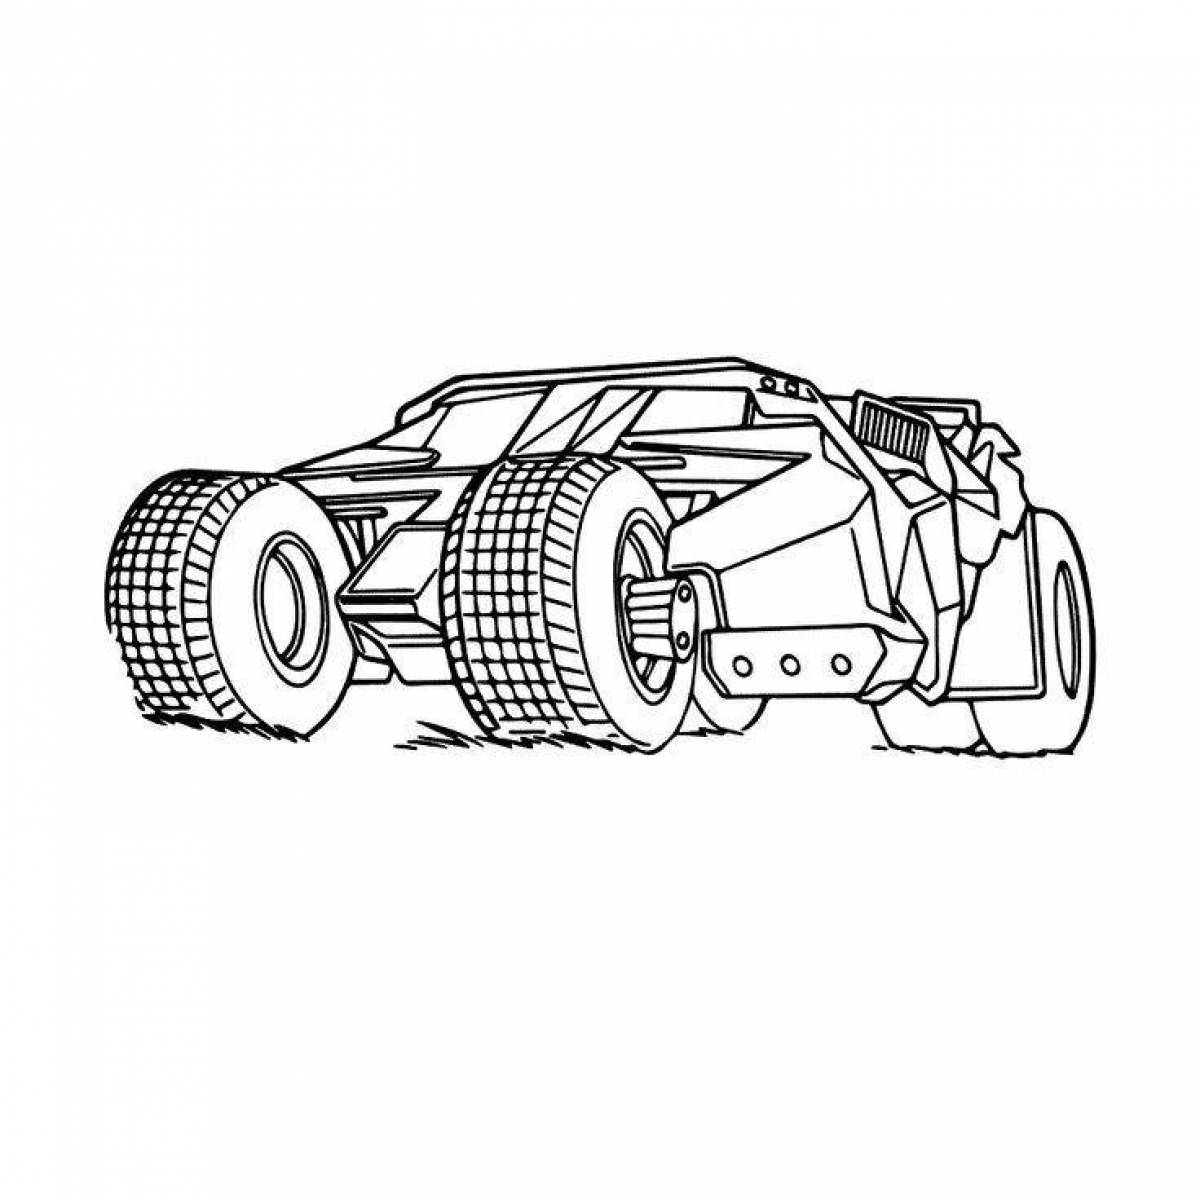 Deluxe Batmobile Coloring Page